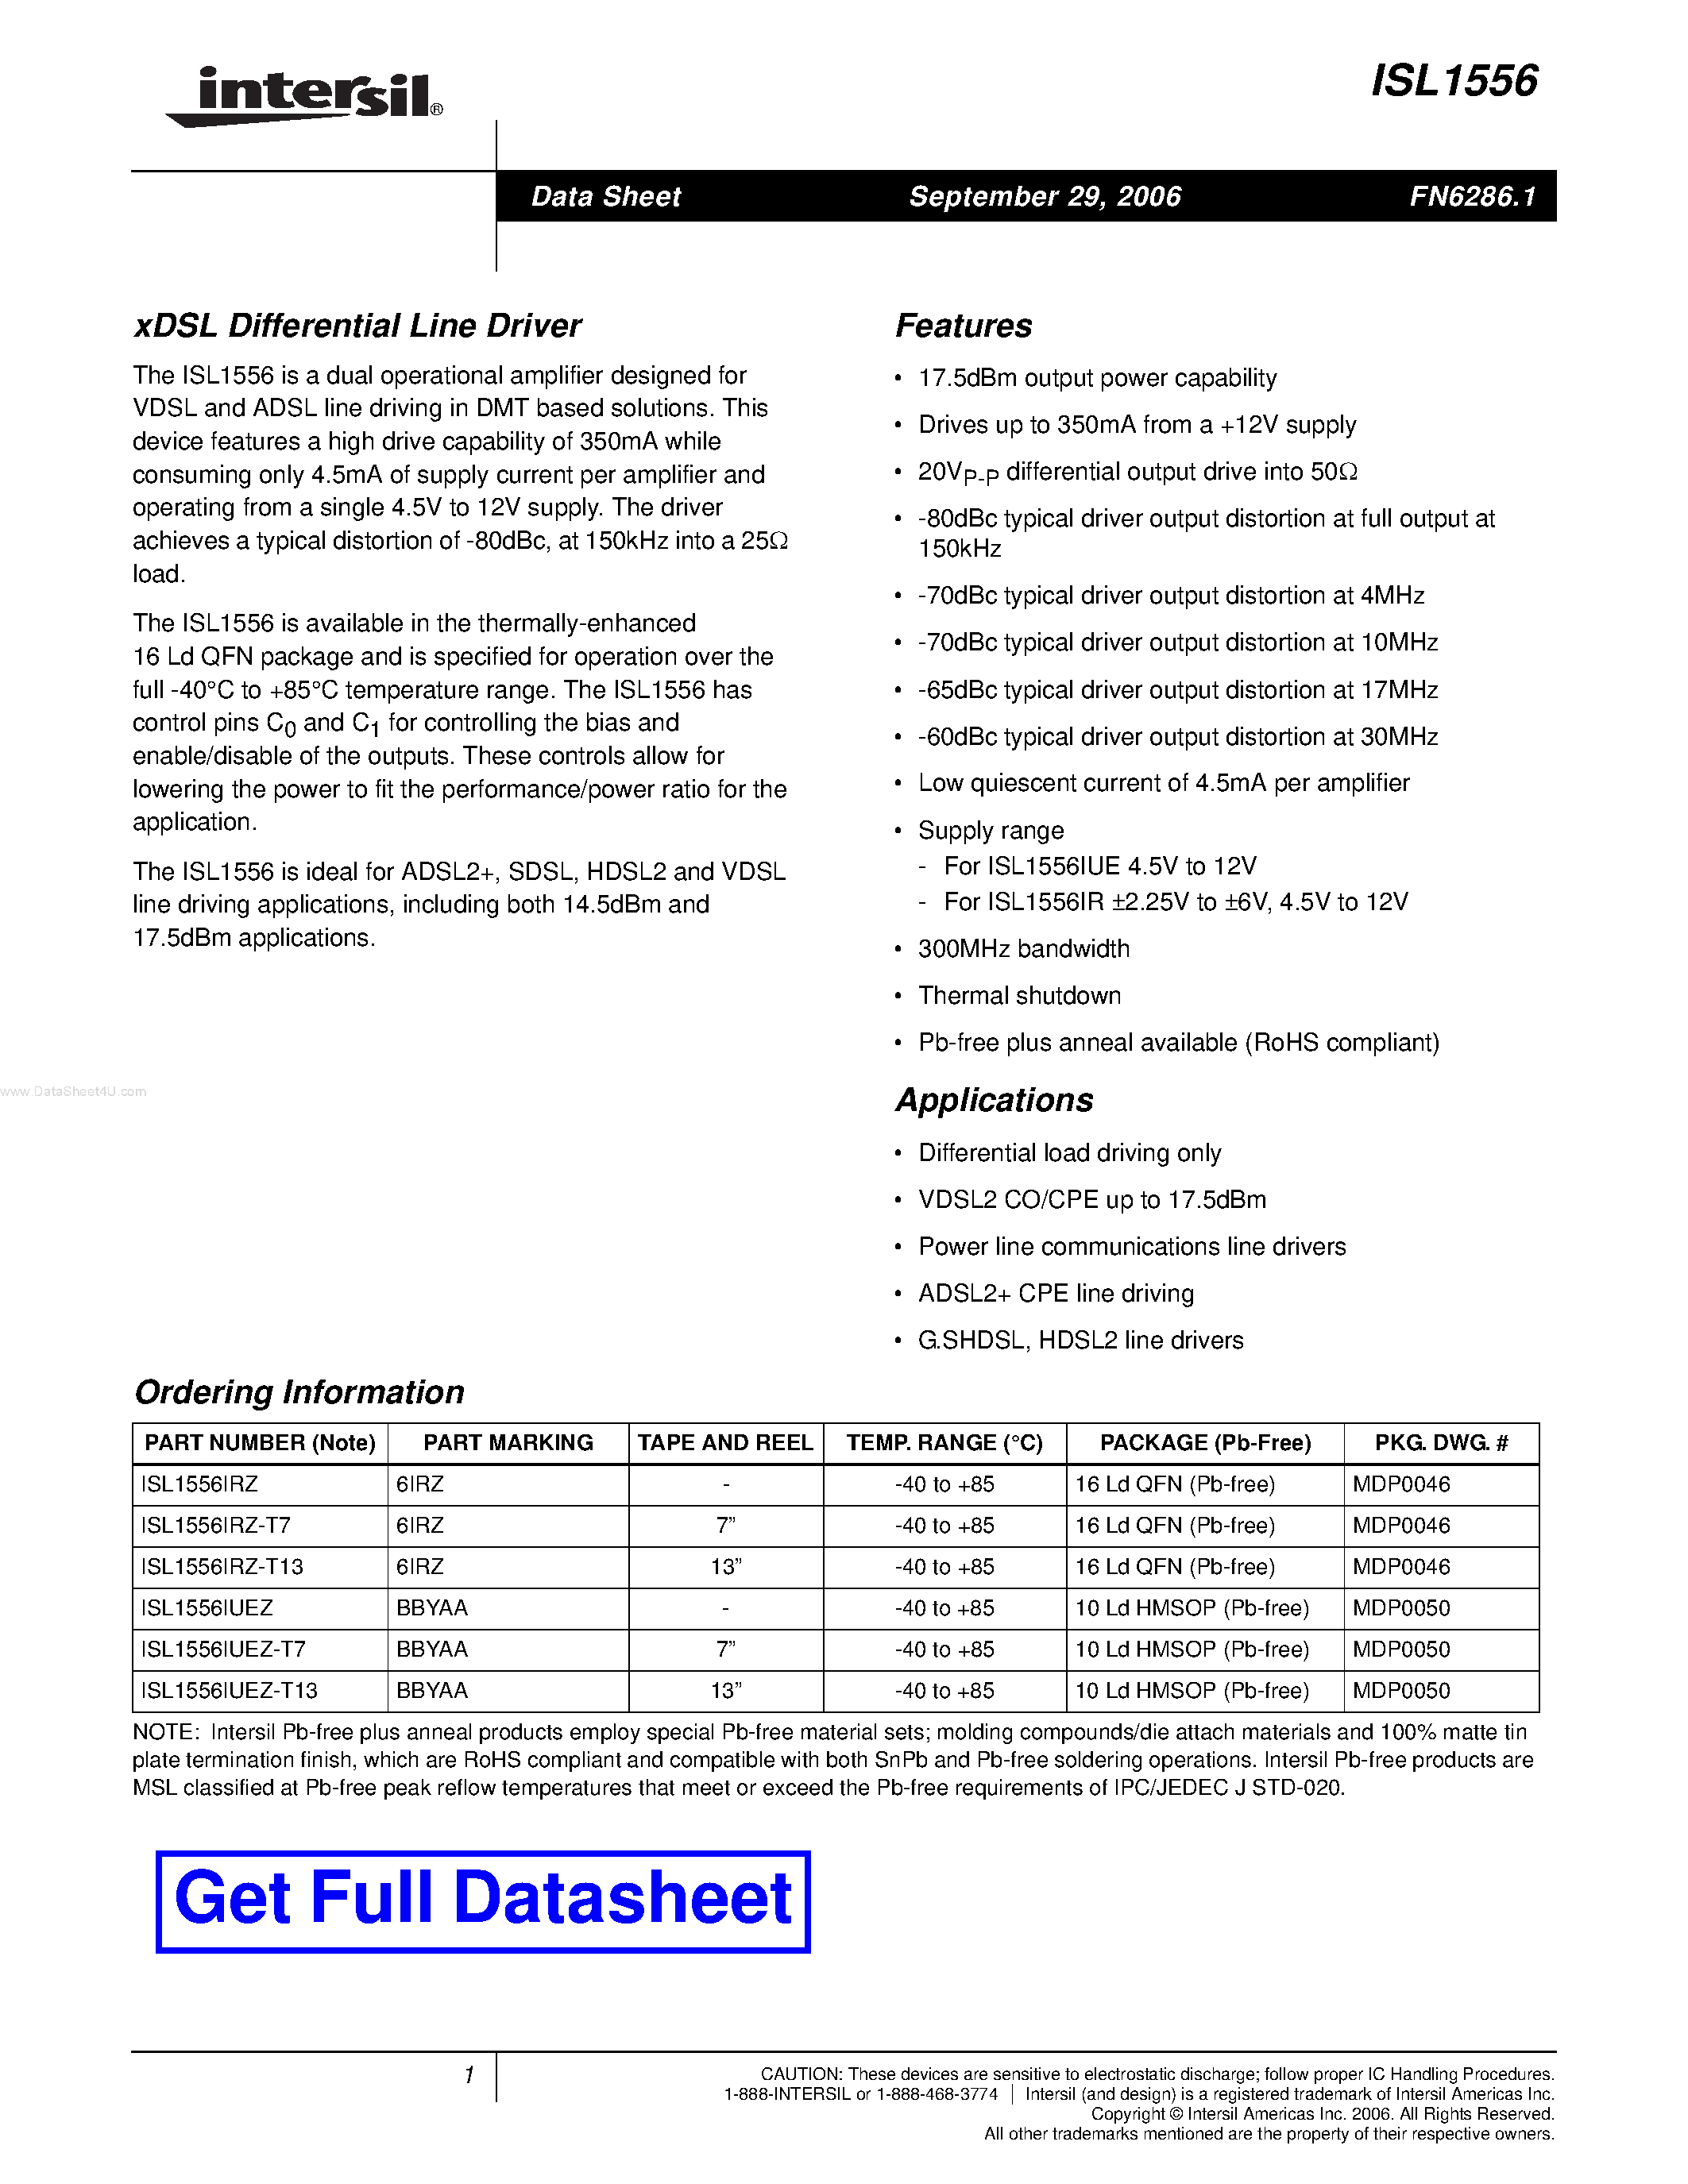 Datasheet ISL1556 - xDSL Differential Line Driver page 1